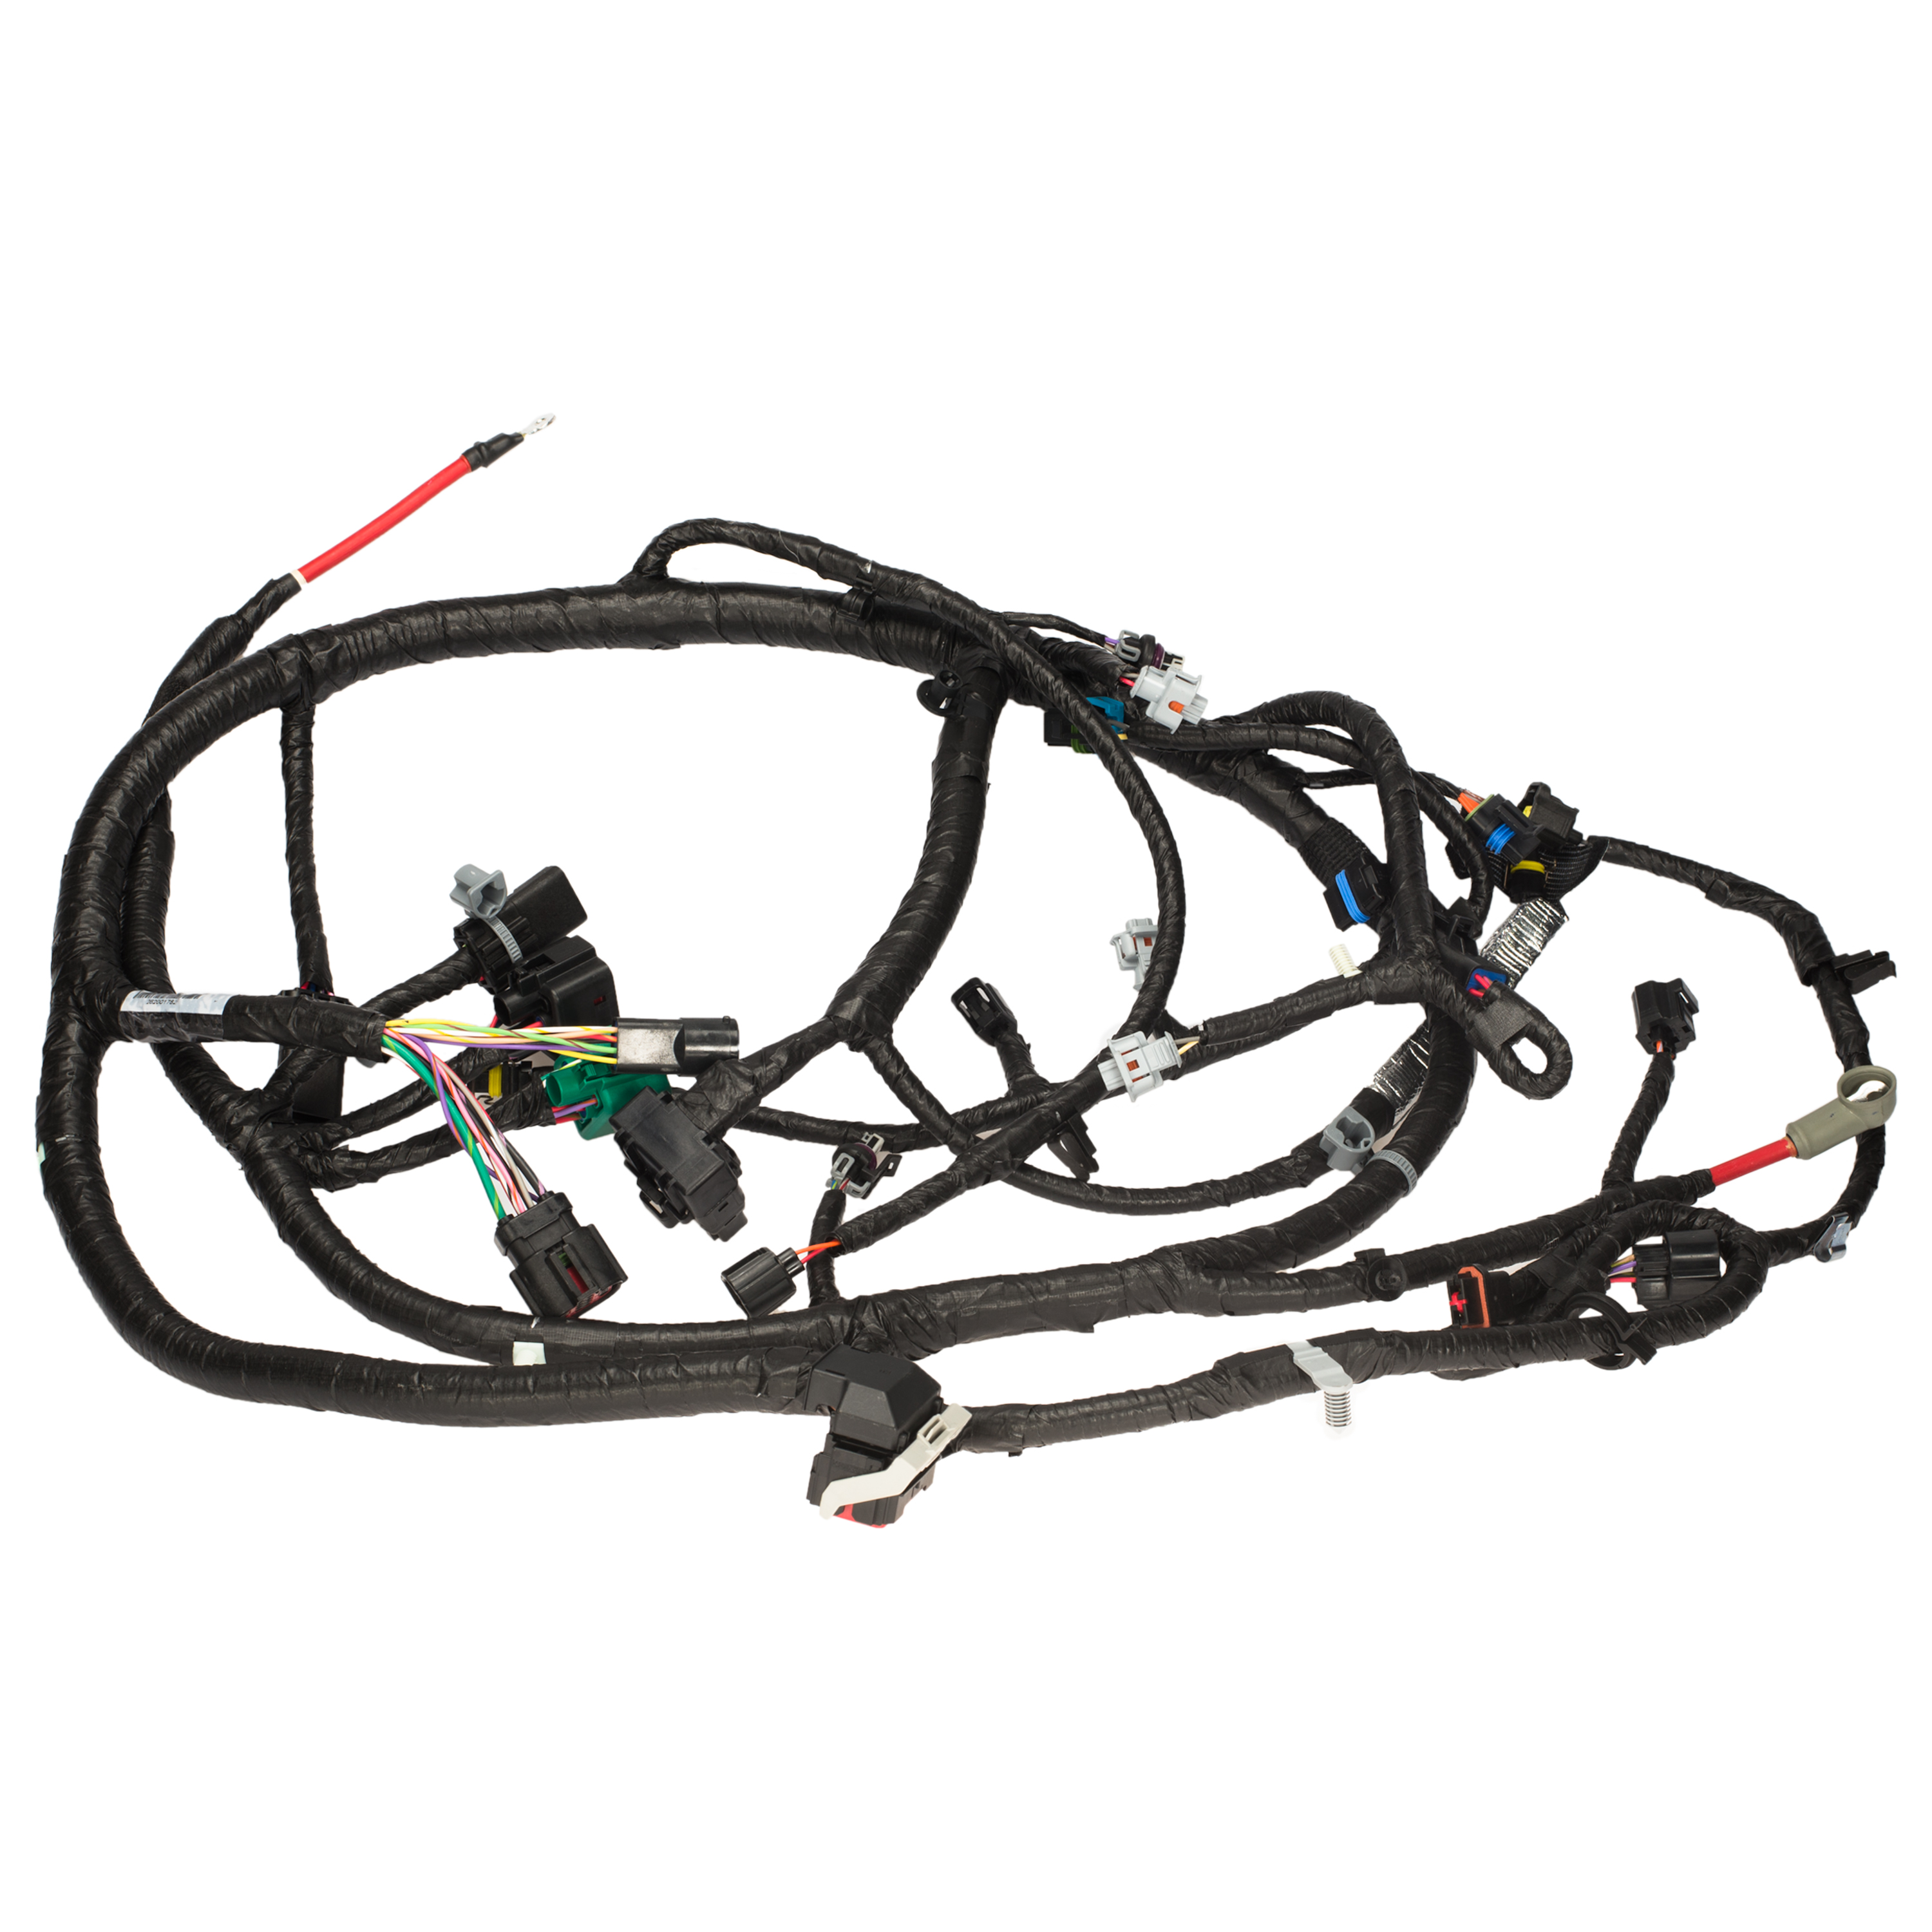  Ford FICM X1 Terminal to PCM wiring harness All 6.0 Ford F250, F350, F450, F550 Powerstroke